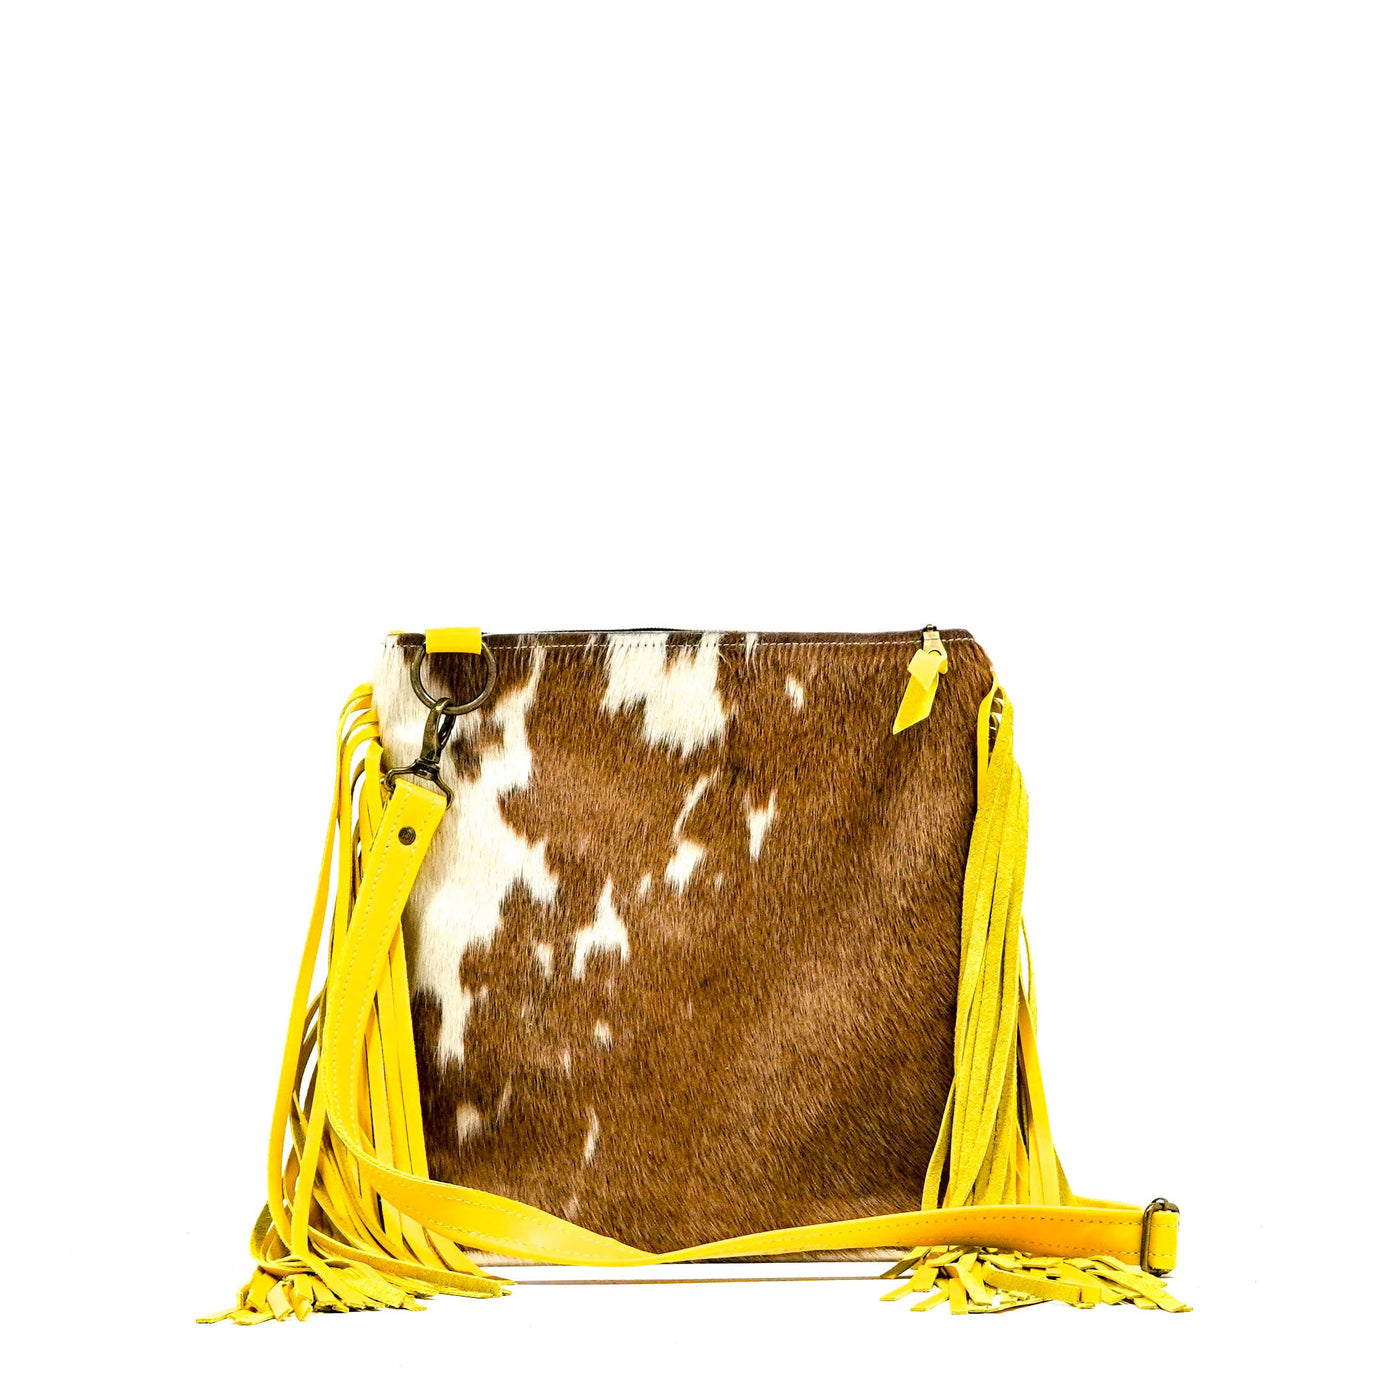 Shania - Chocolate & White w/ Yellow Leather-Shania-Western-Cowhide-Bags-Handmade-Products-Gifts-Dancing Cactus Designs